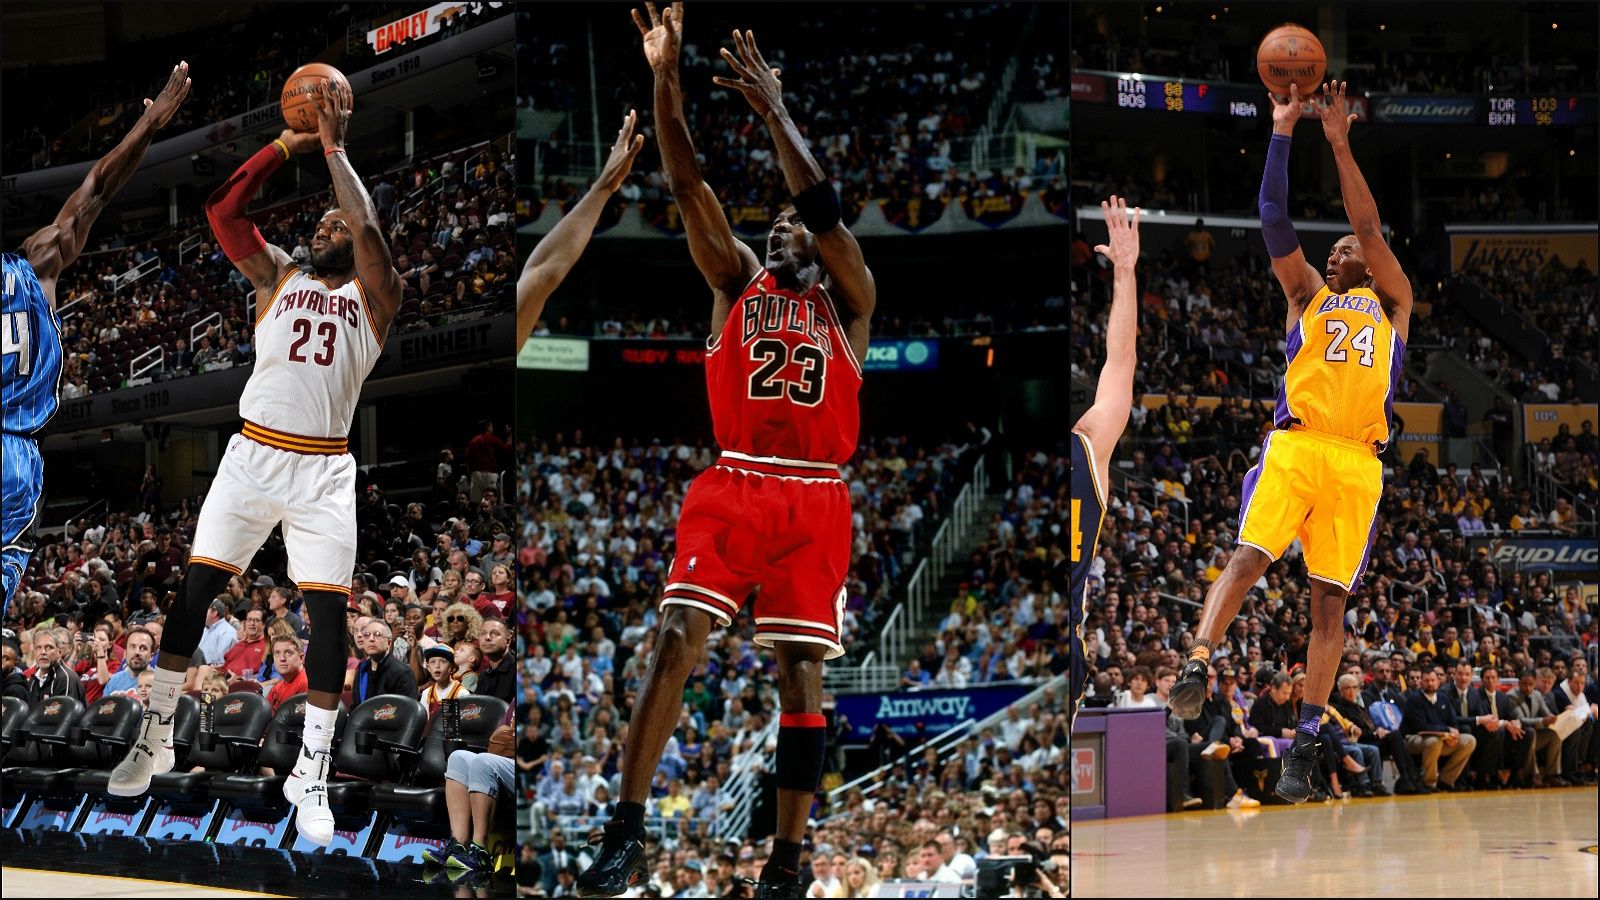 Ranking the 25 greatest players in NBA history